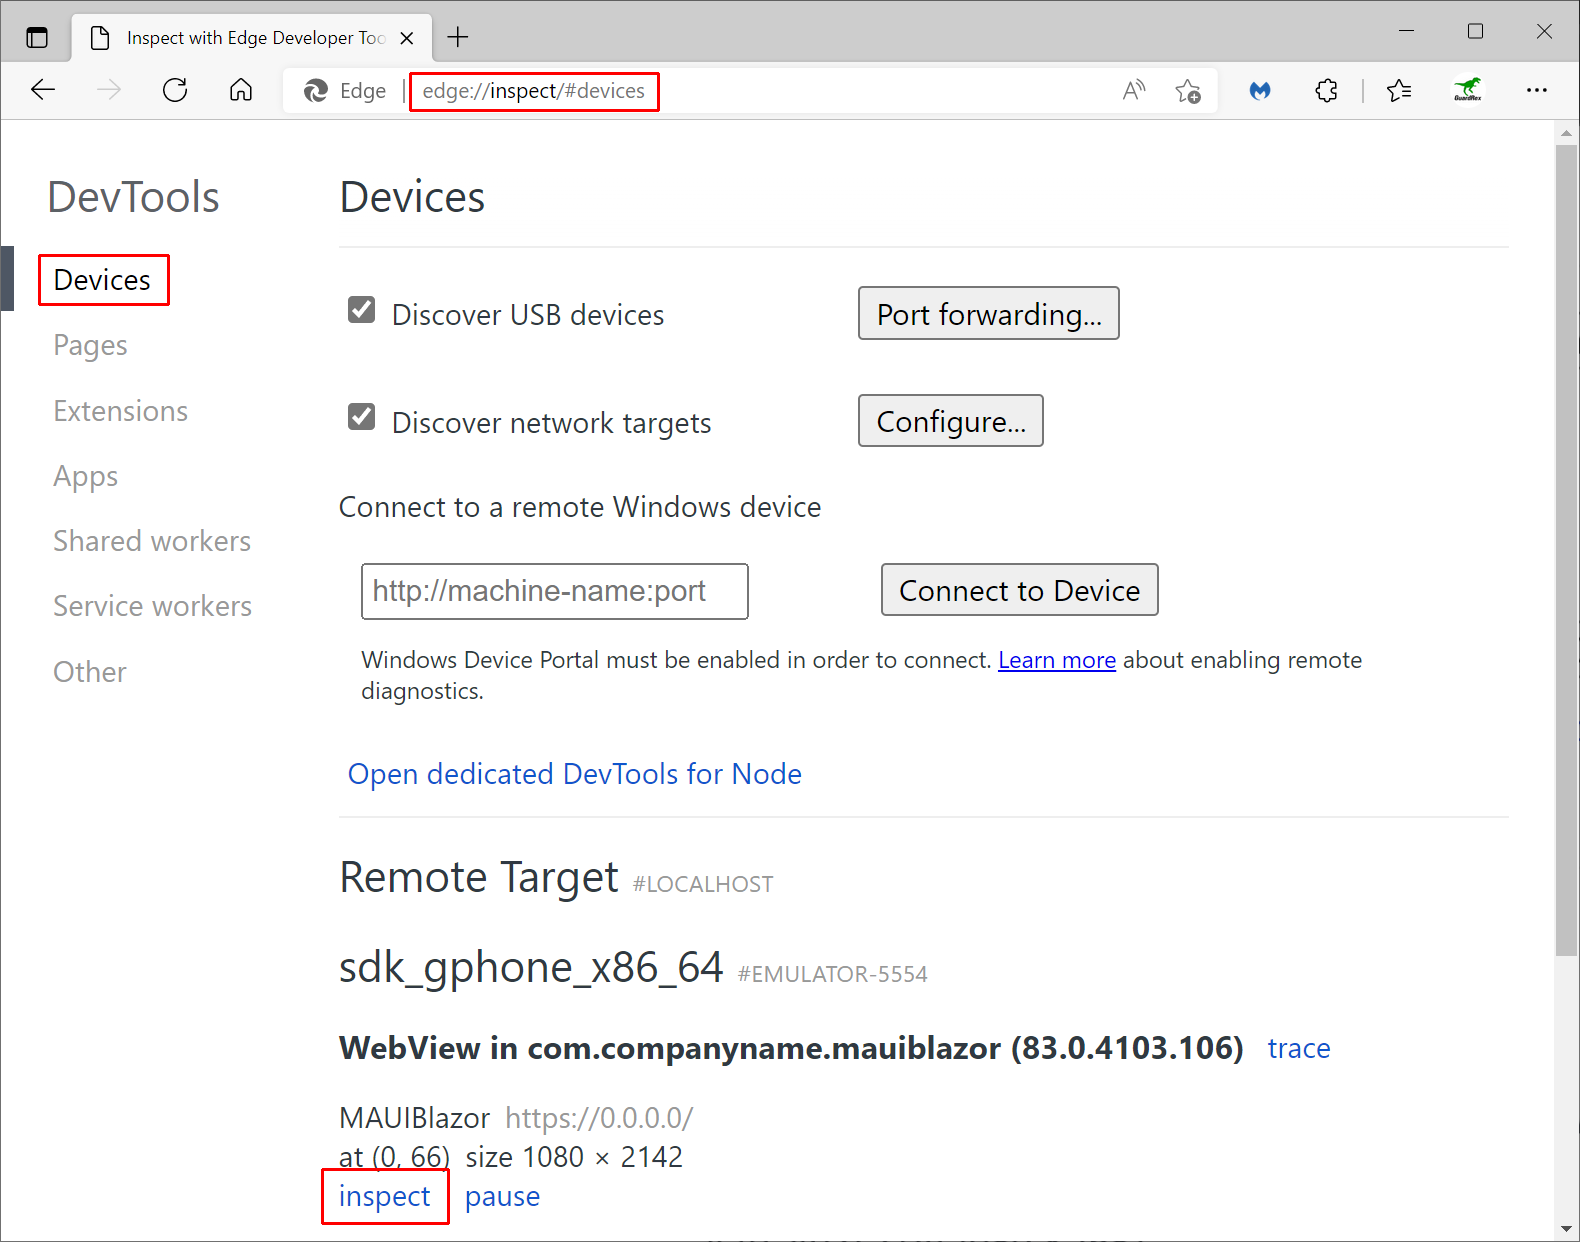 Microsoft Edge Devices showing the BlazorWebView's "inspect" link button to open developer tools.